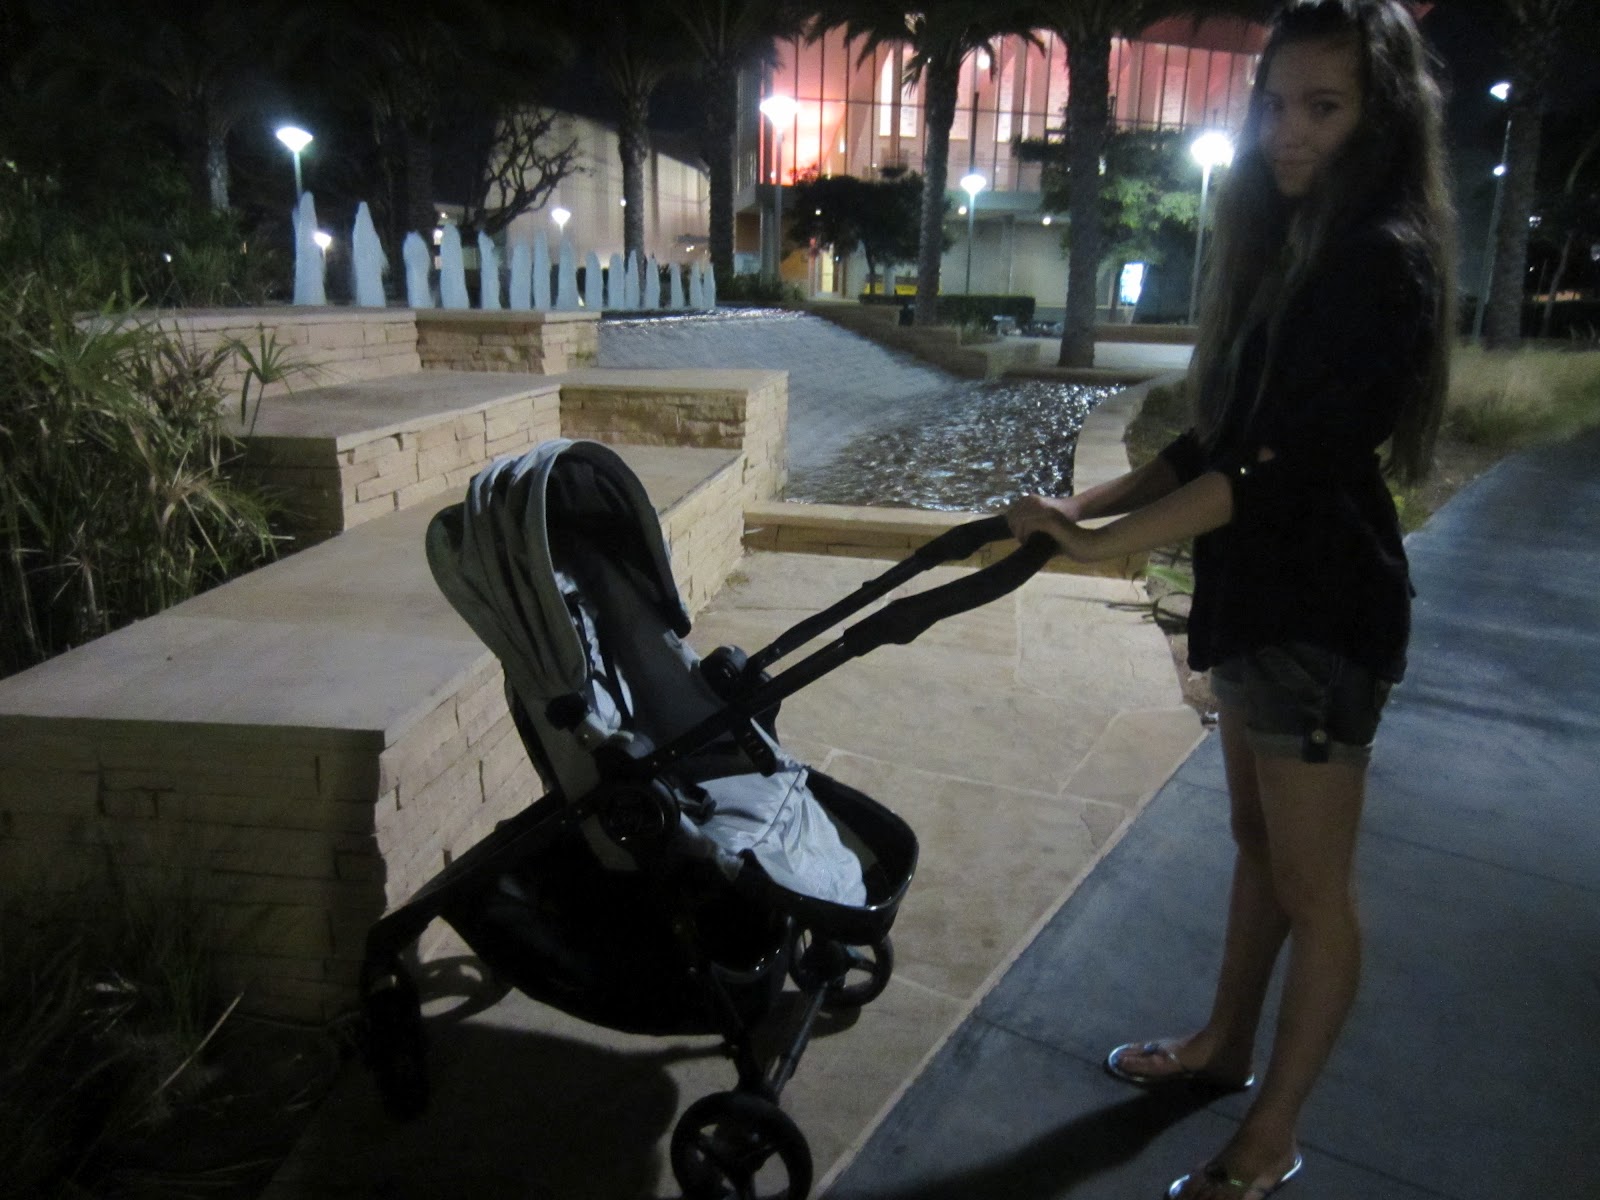 baby jogger city versa review